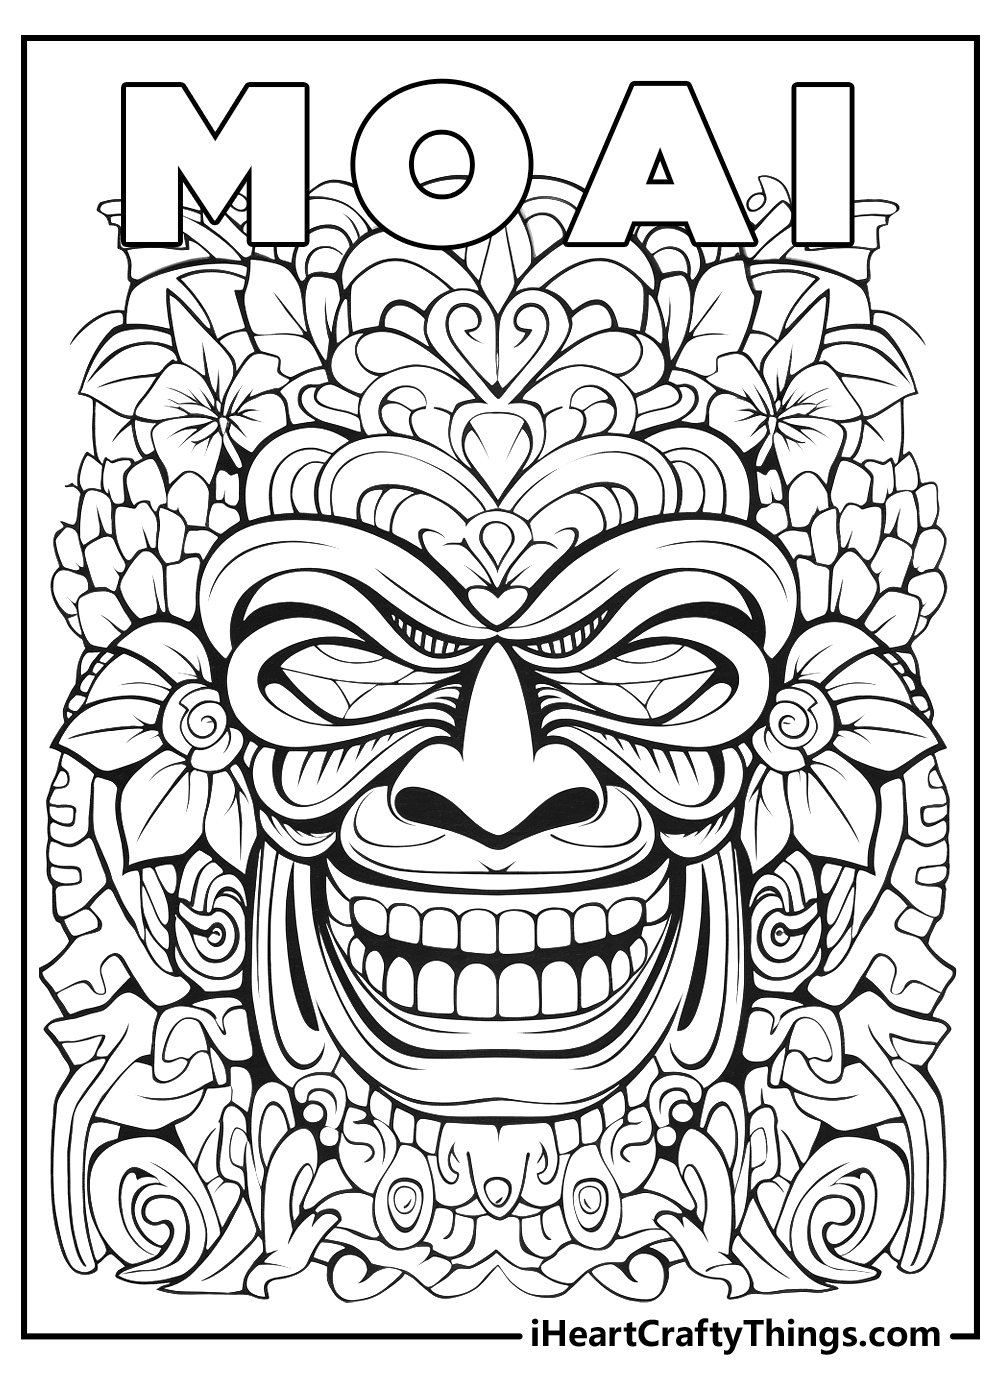 New Hawaii Coloring Pages